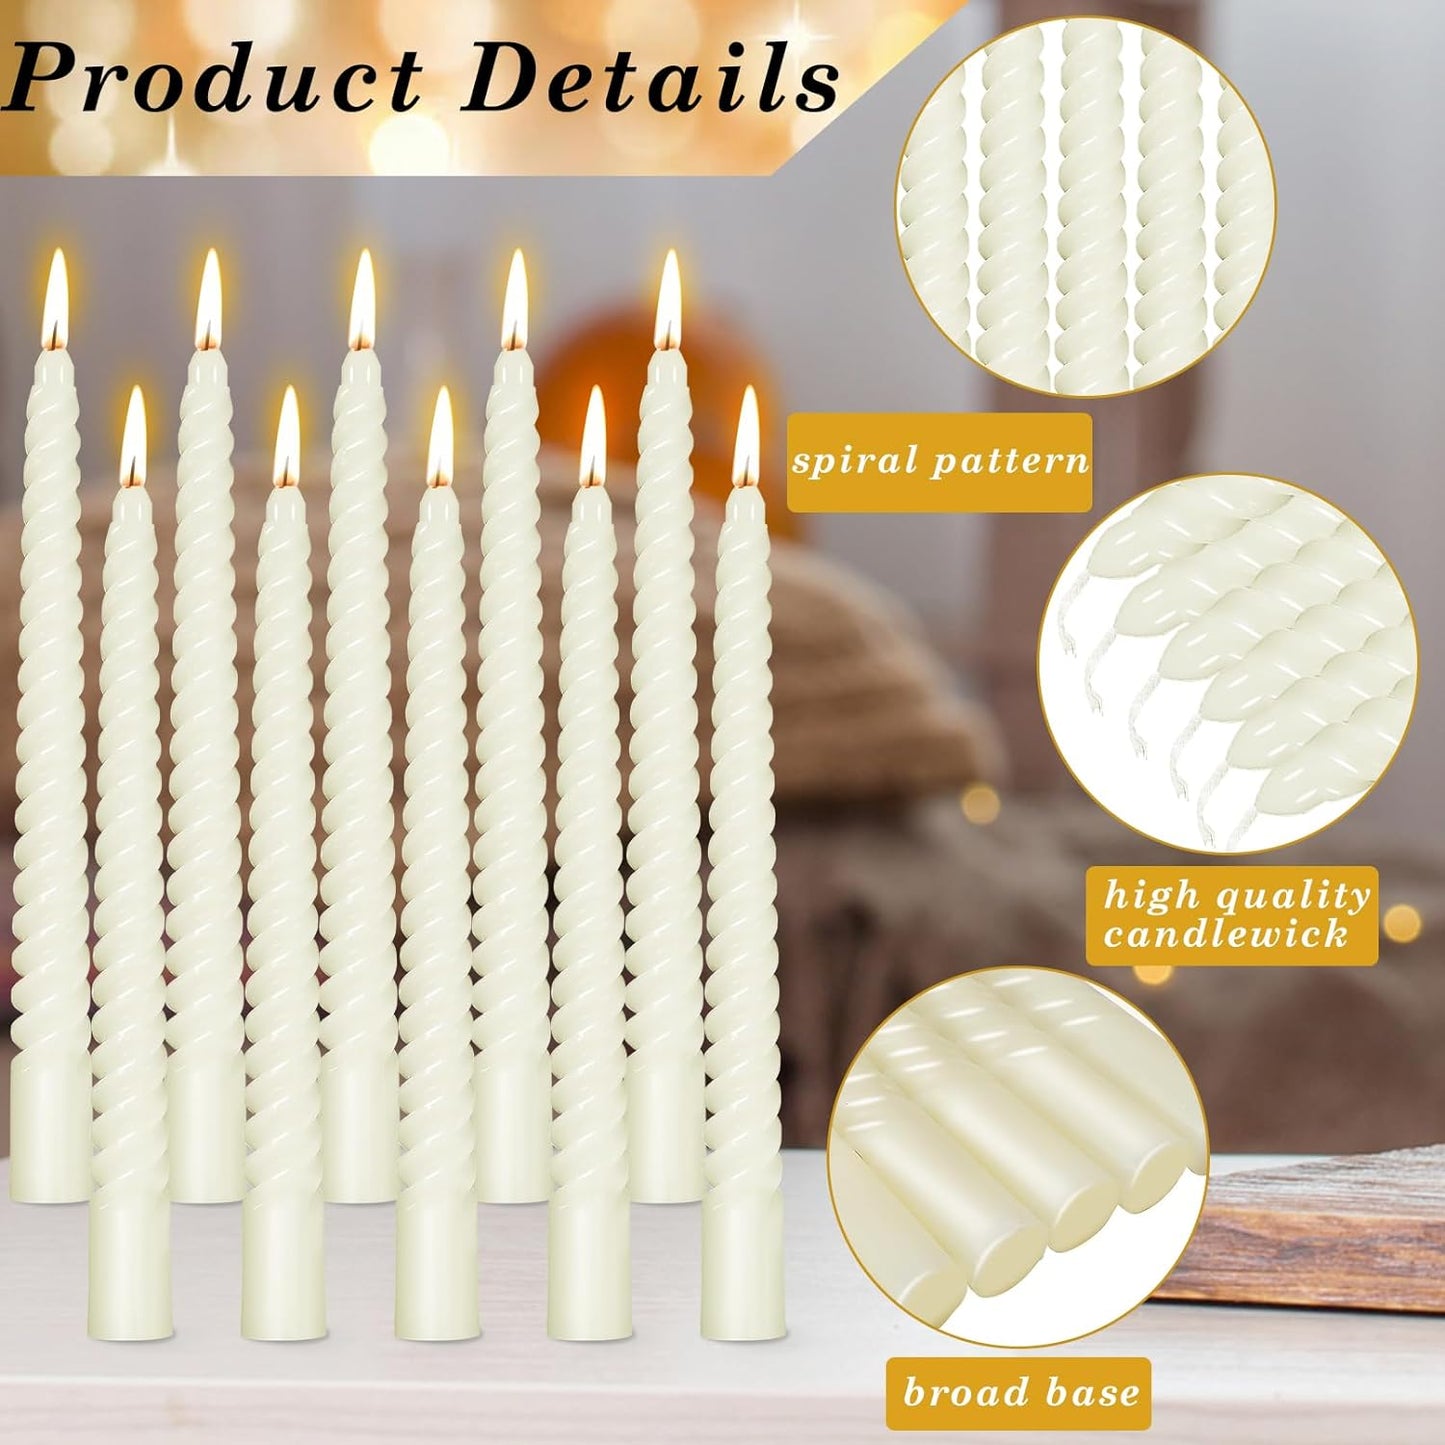 AuraDecor Spiral Taper Candles Set of 10, Unscented Dripless Candlesticks for Home Decor, Dinner, 10 Inch